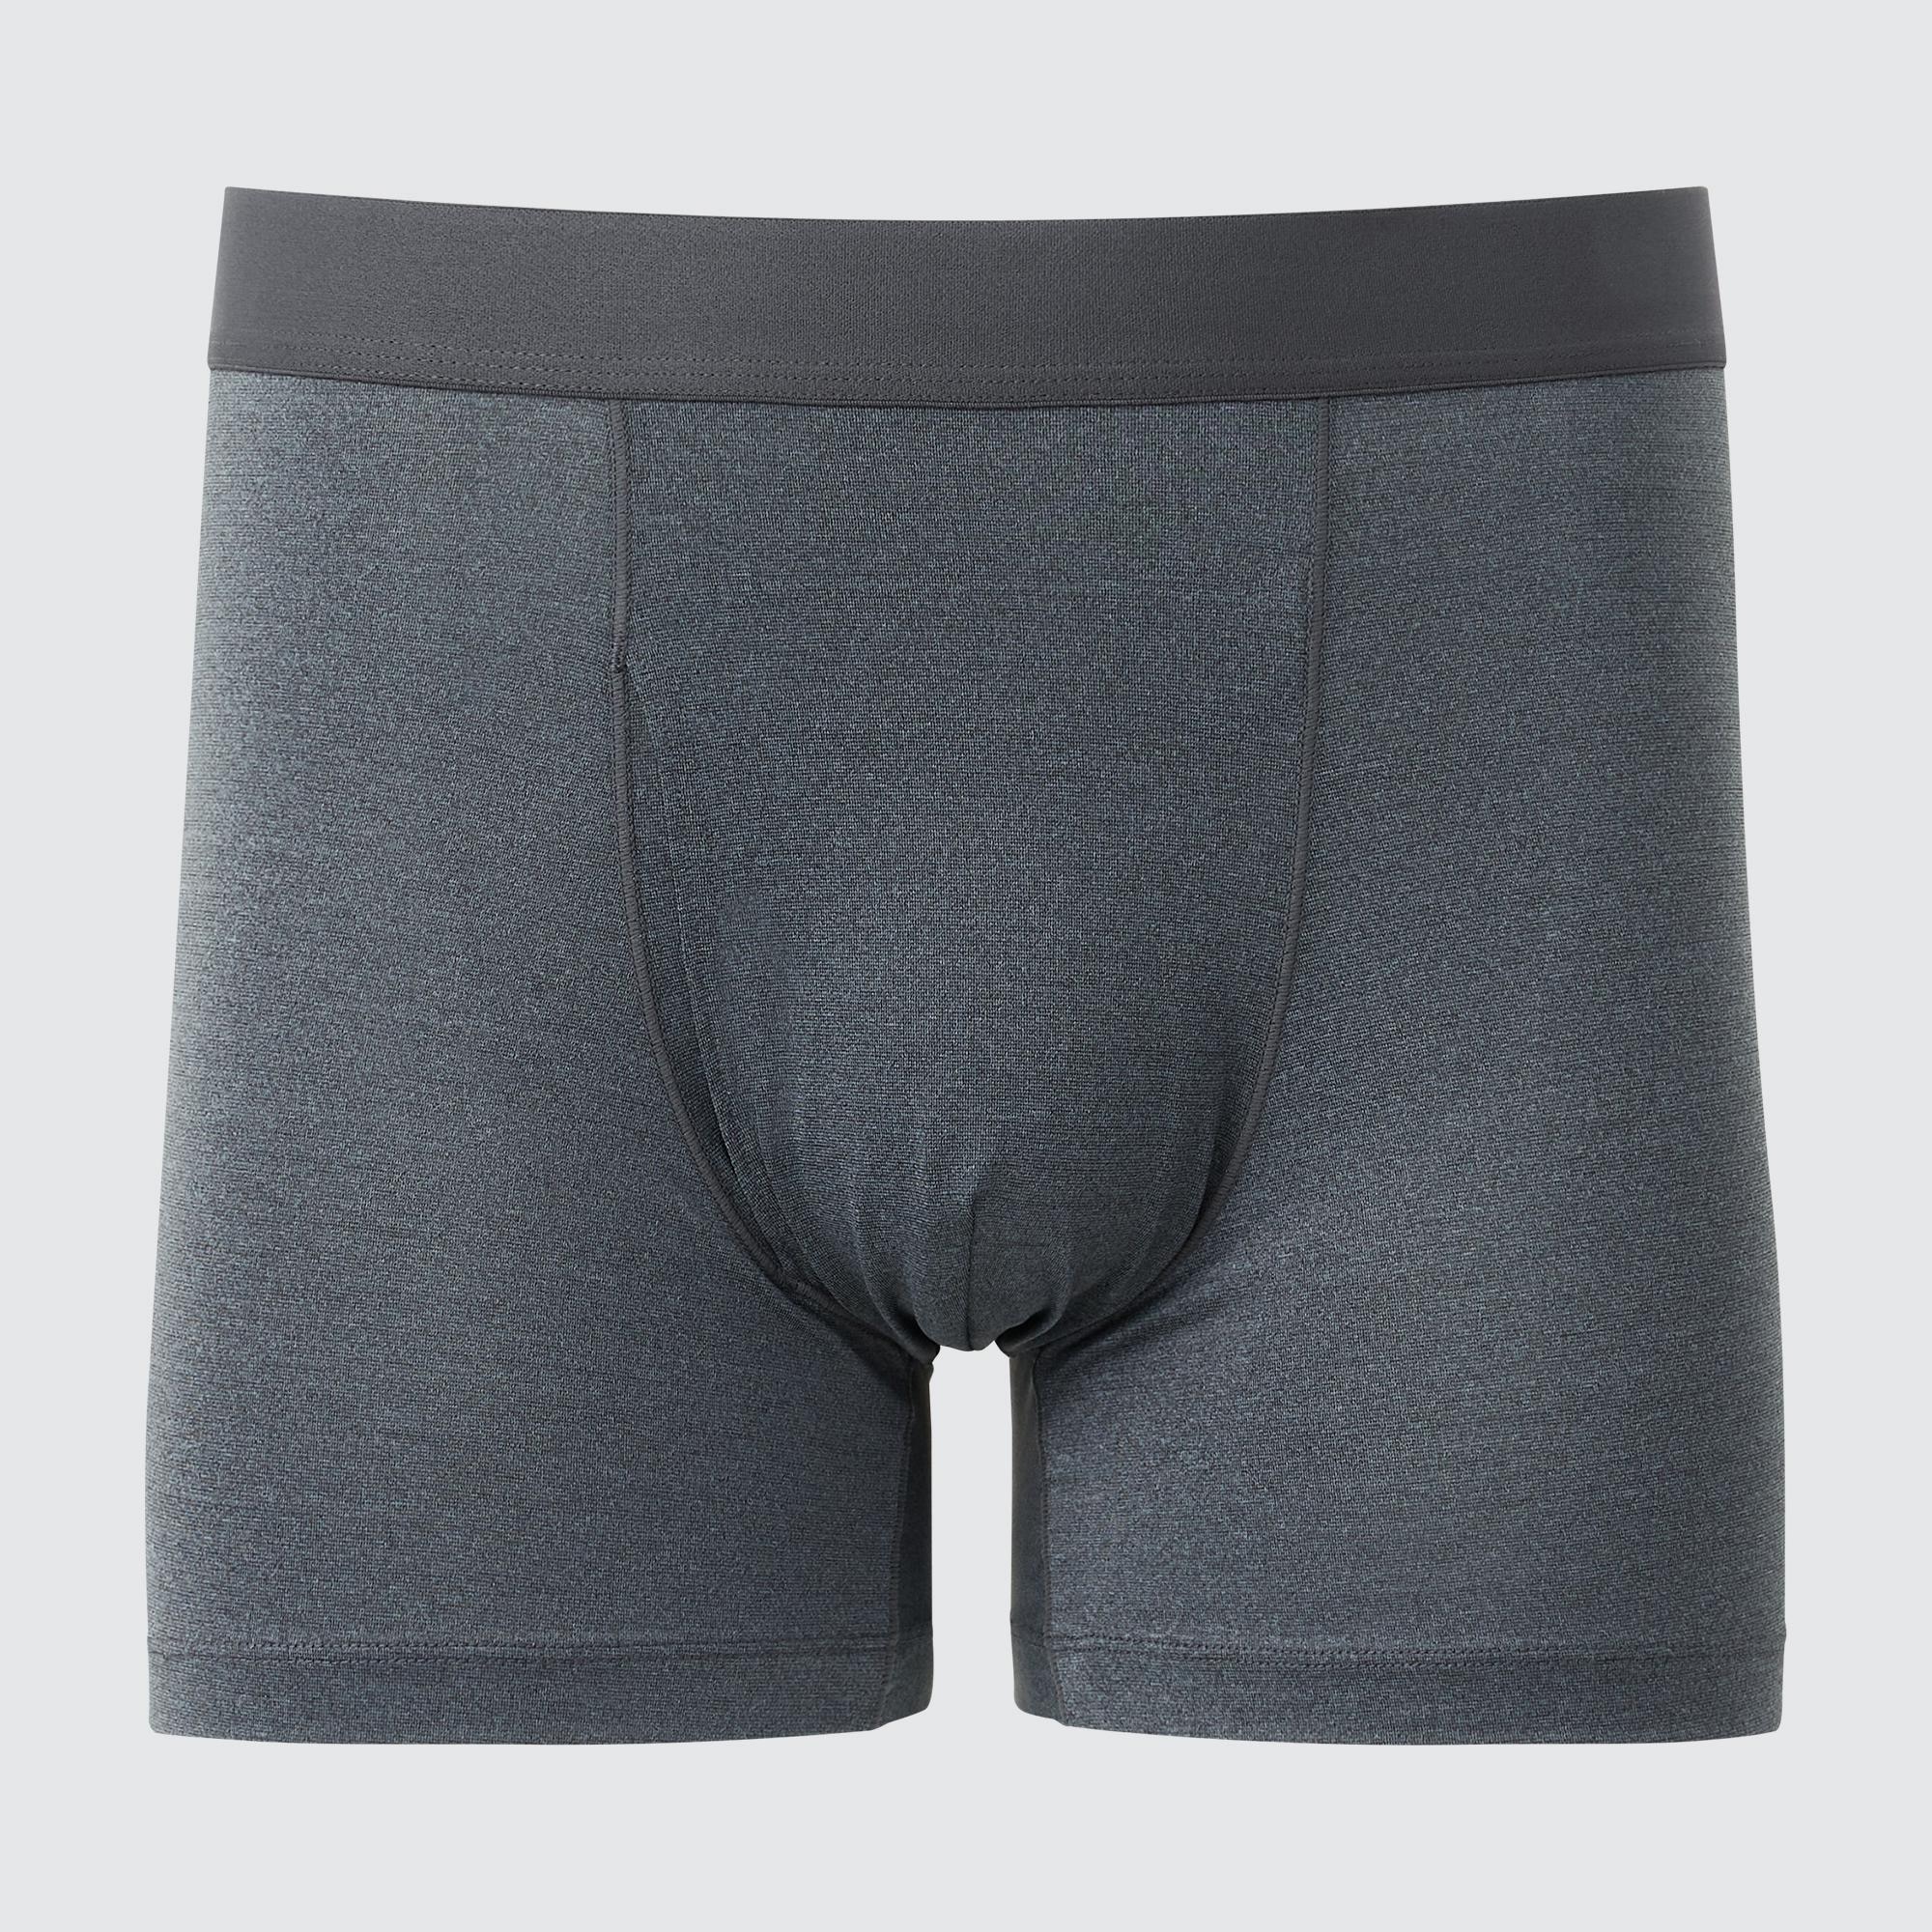 UNIQLO AIRism Boxer Briefs Black/Navy S-4XL Front Opening